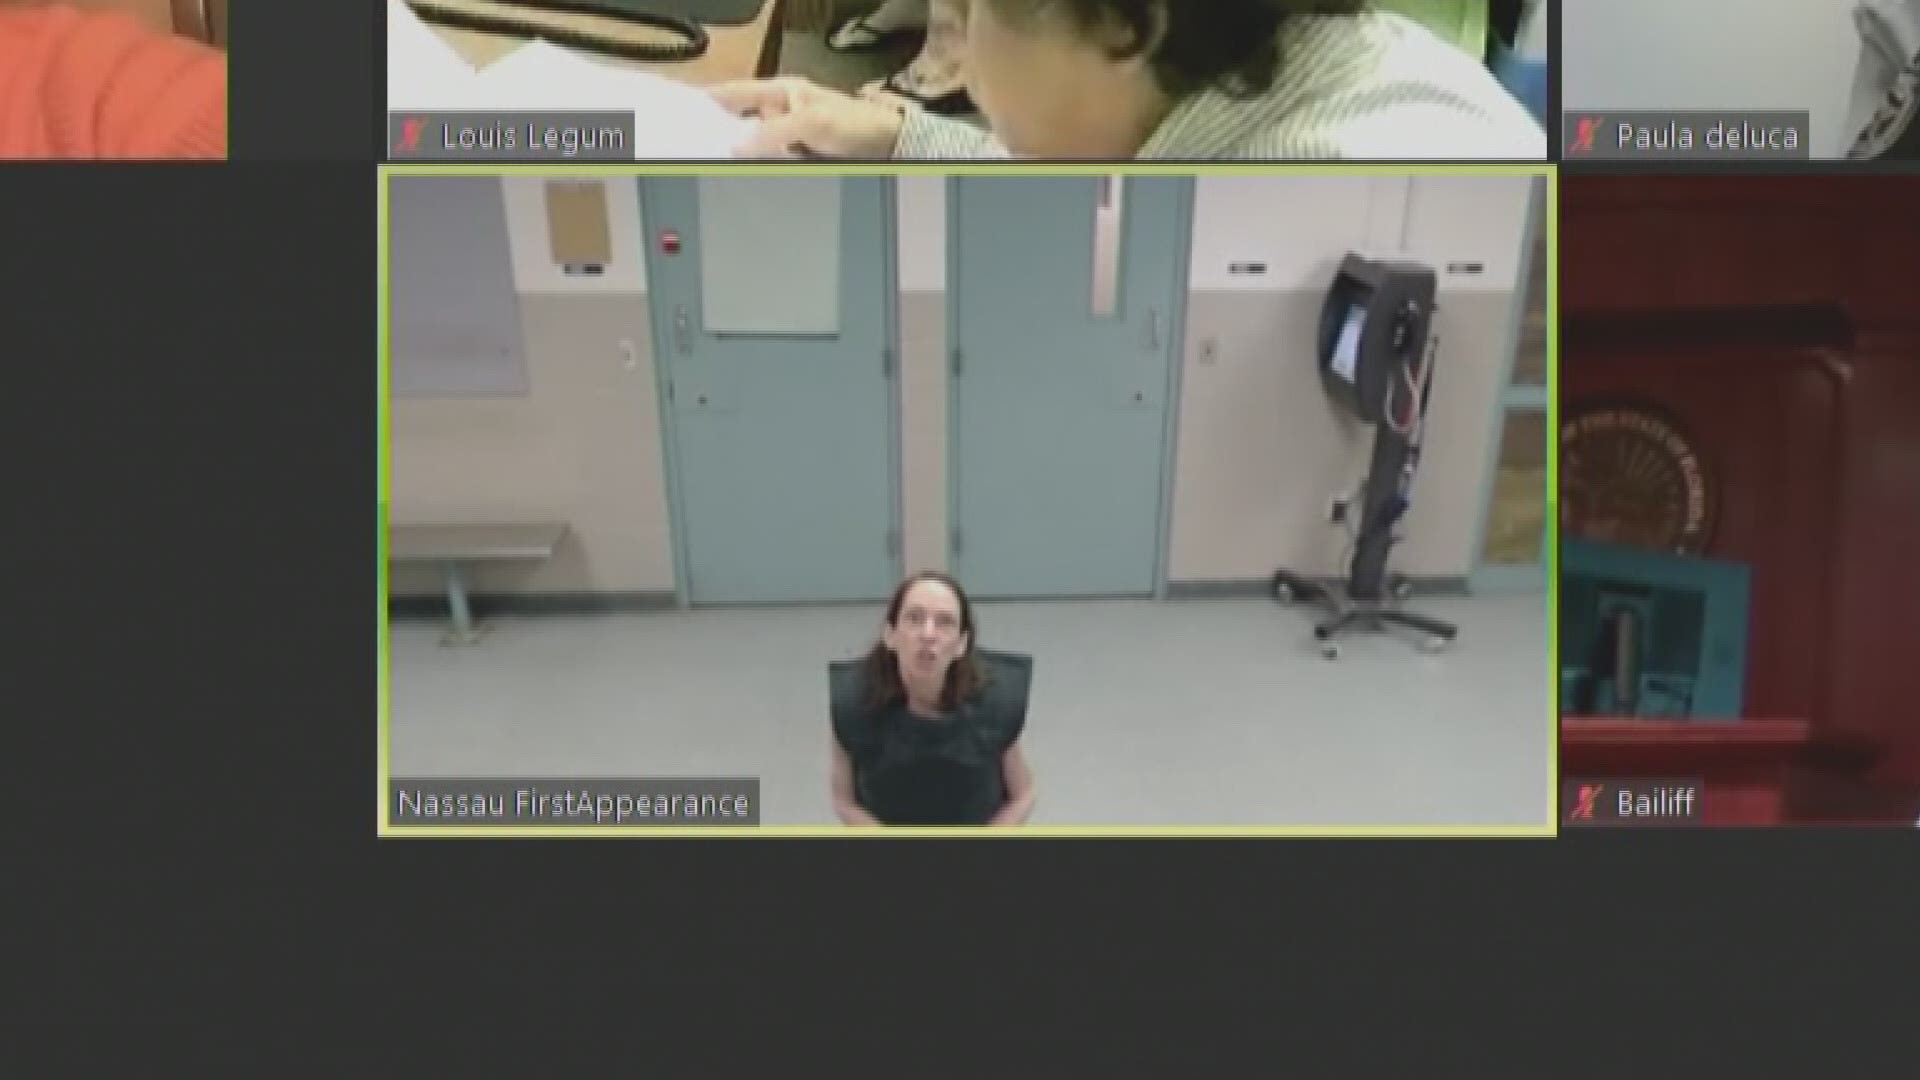 Kimberly Kessler cursed out the court via video conference, left the room and refused to come back to her screen for the virtual hearing.